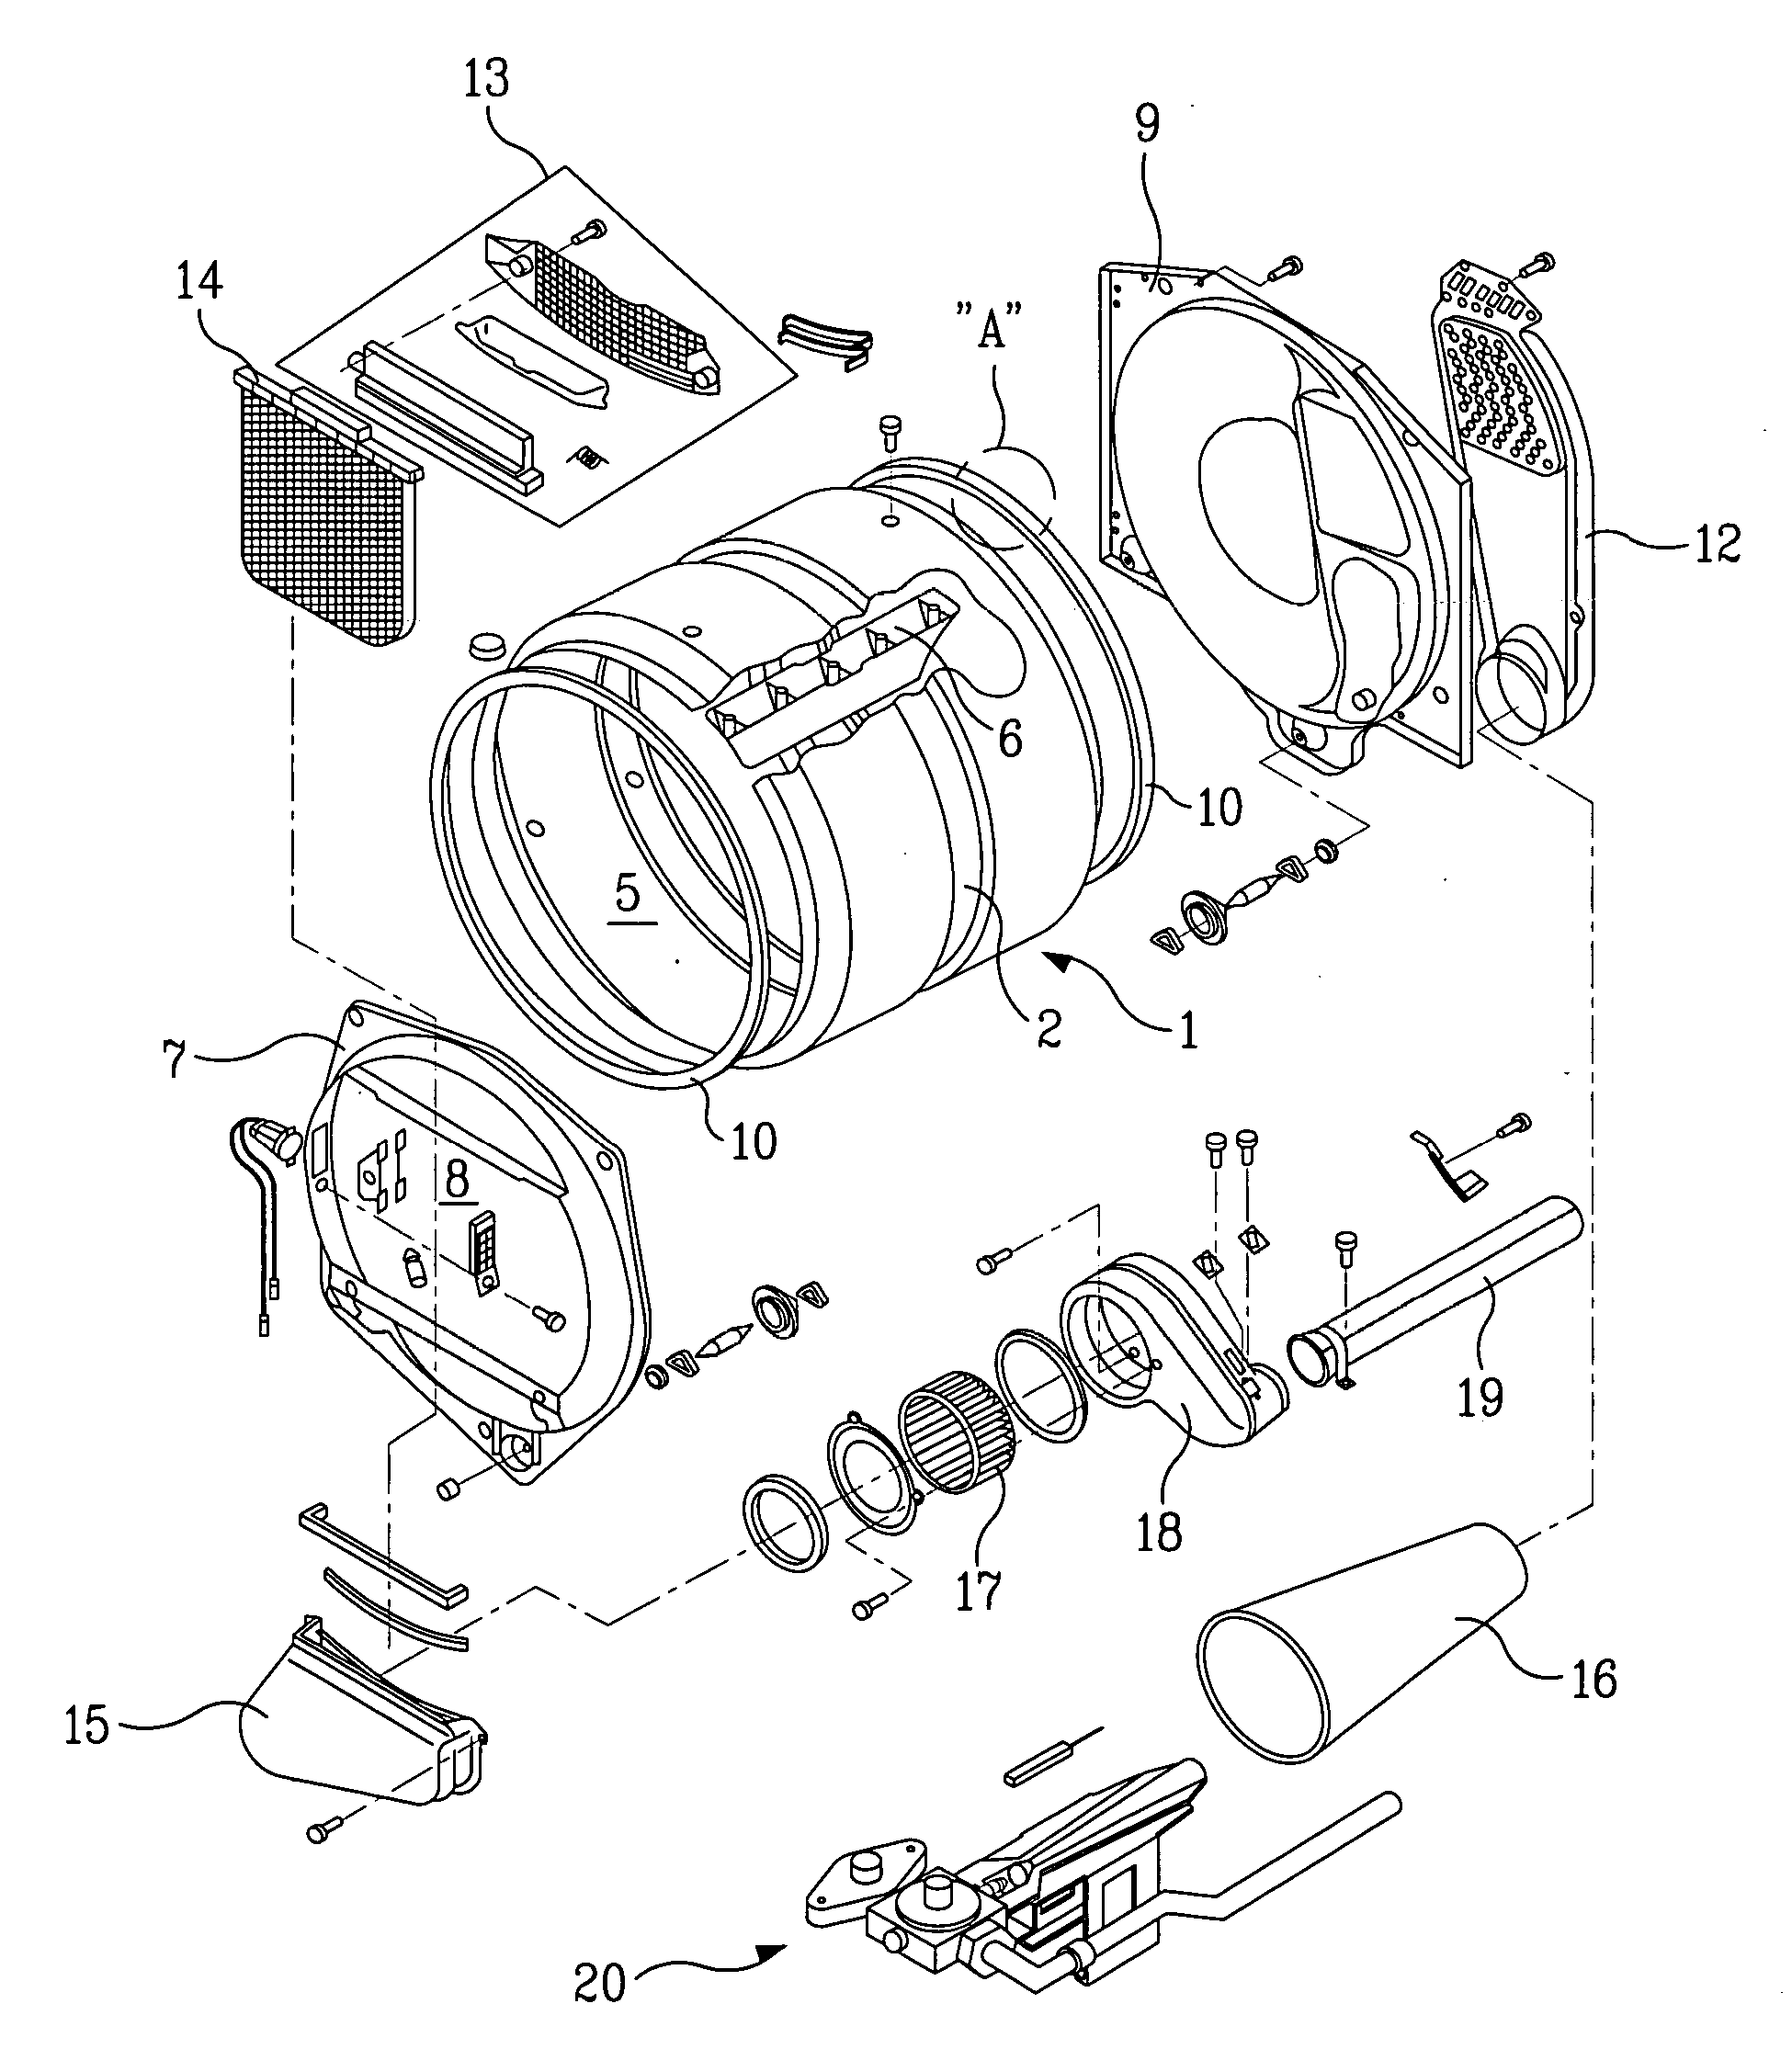 Drum in dryer and method for fabricating the same